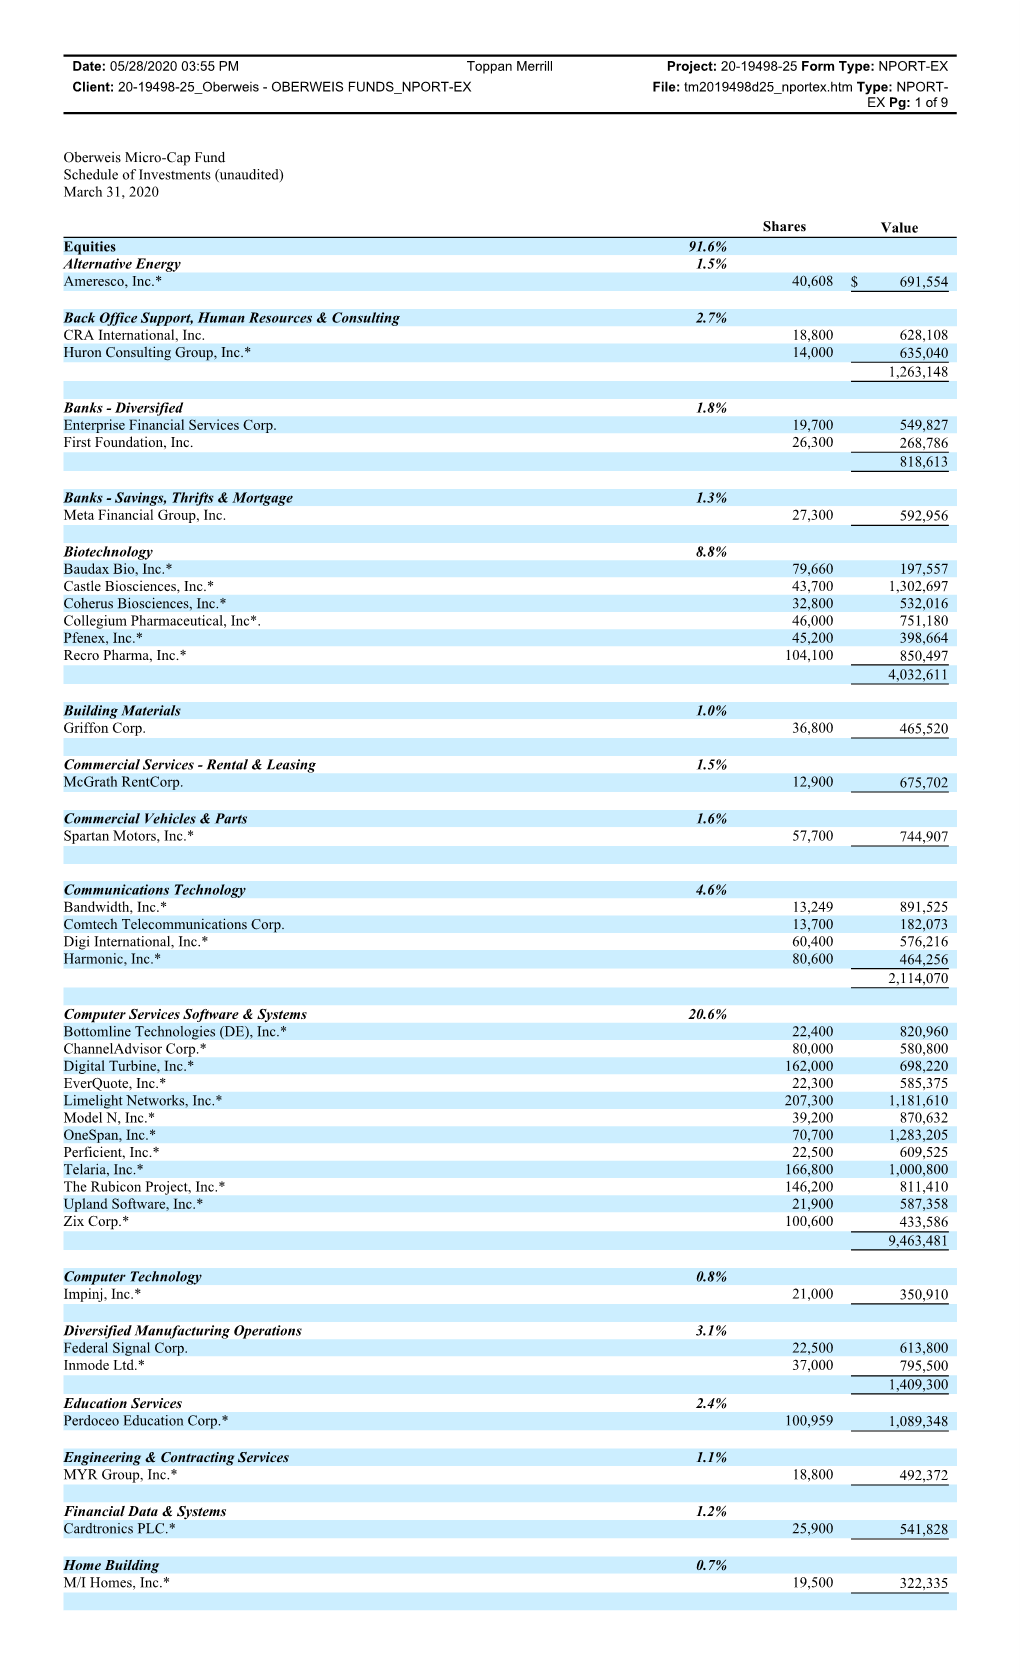 Oberweis Micro-Cap Fund Schedule of Investments (Unaudited) March 31, 2020